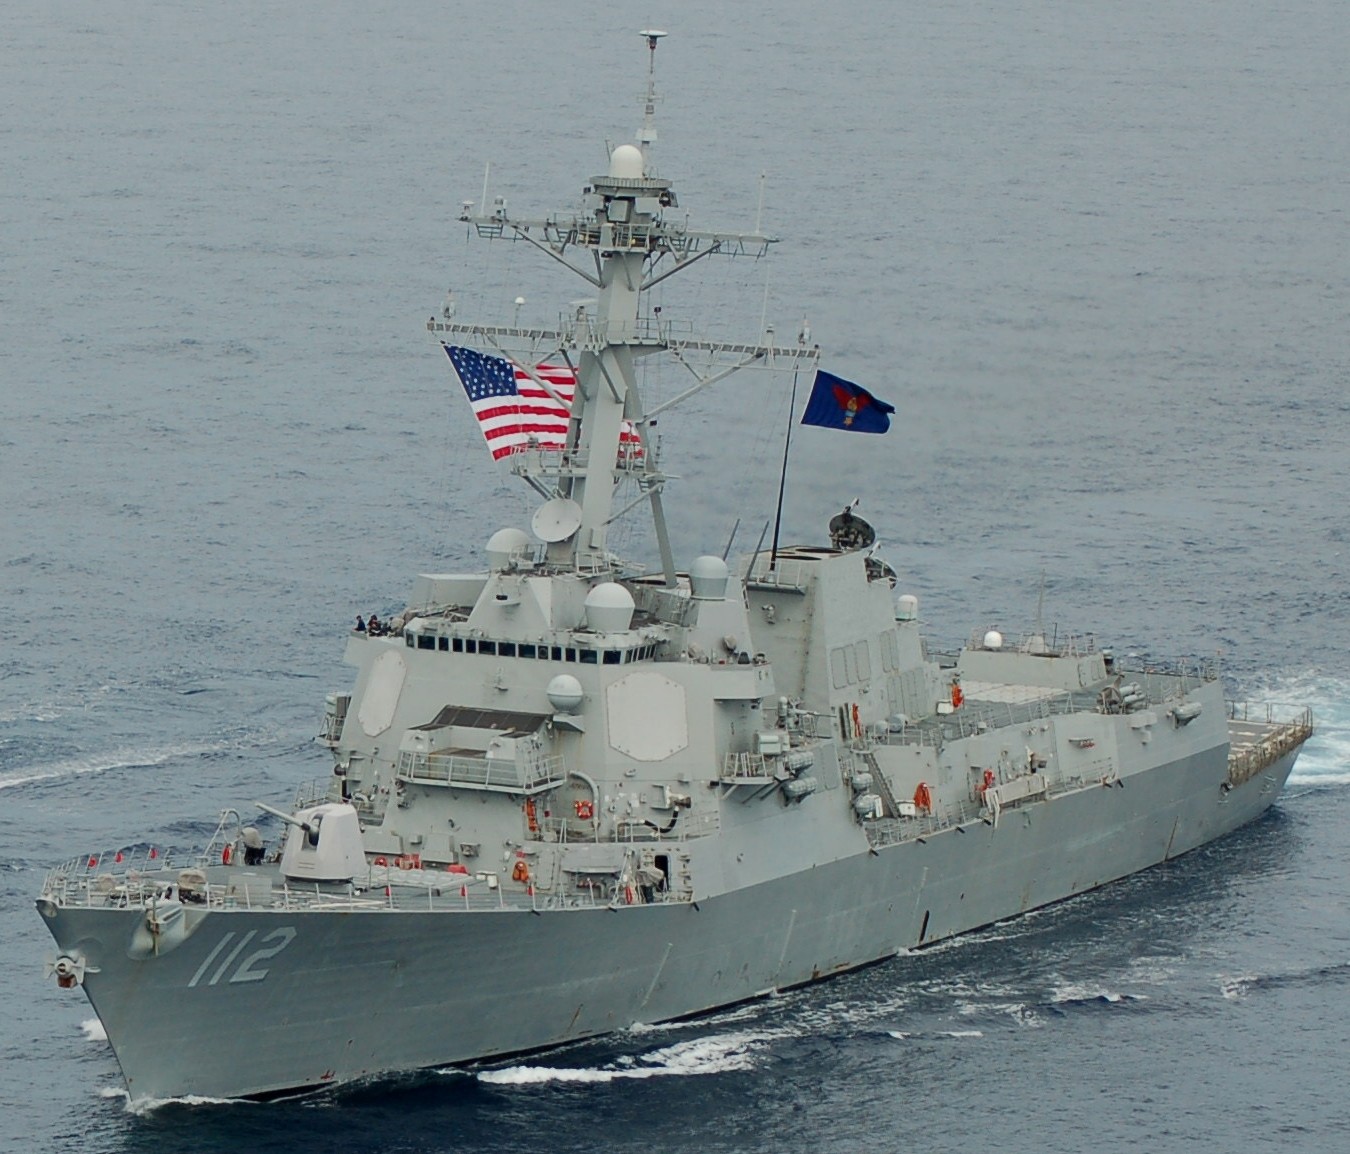 ddg-112 uss michael murphy arleigh burke class guided missile destroyer aegis us navy 23